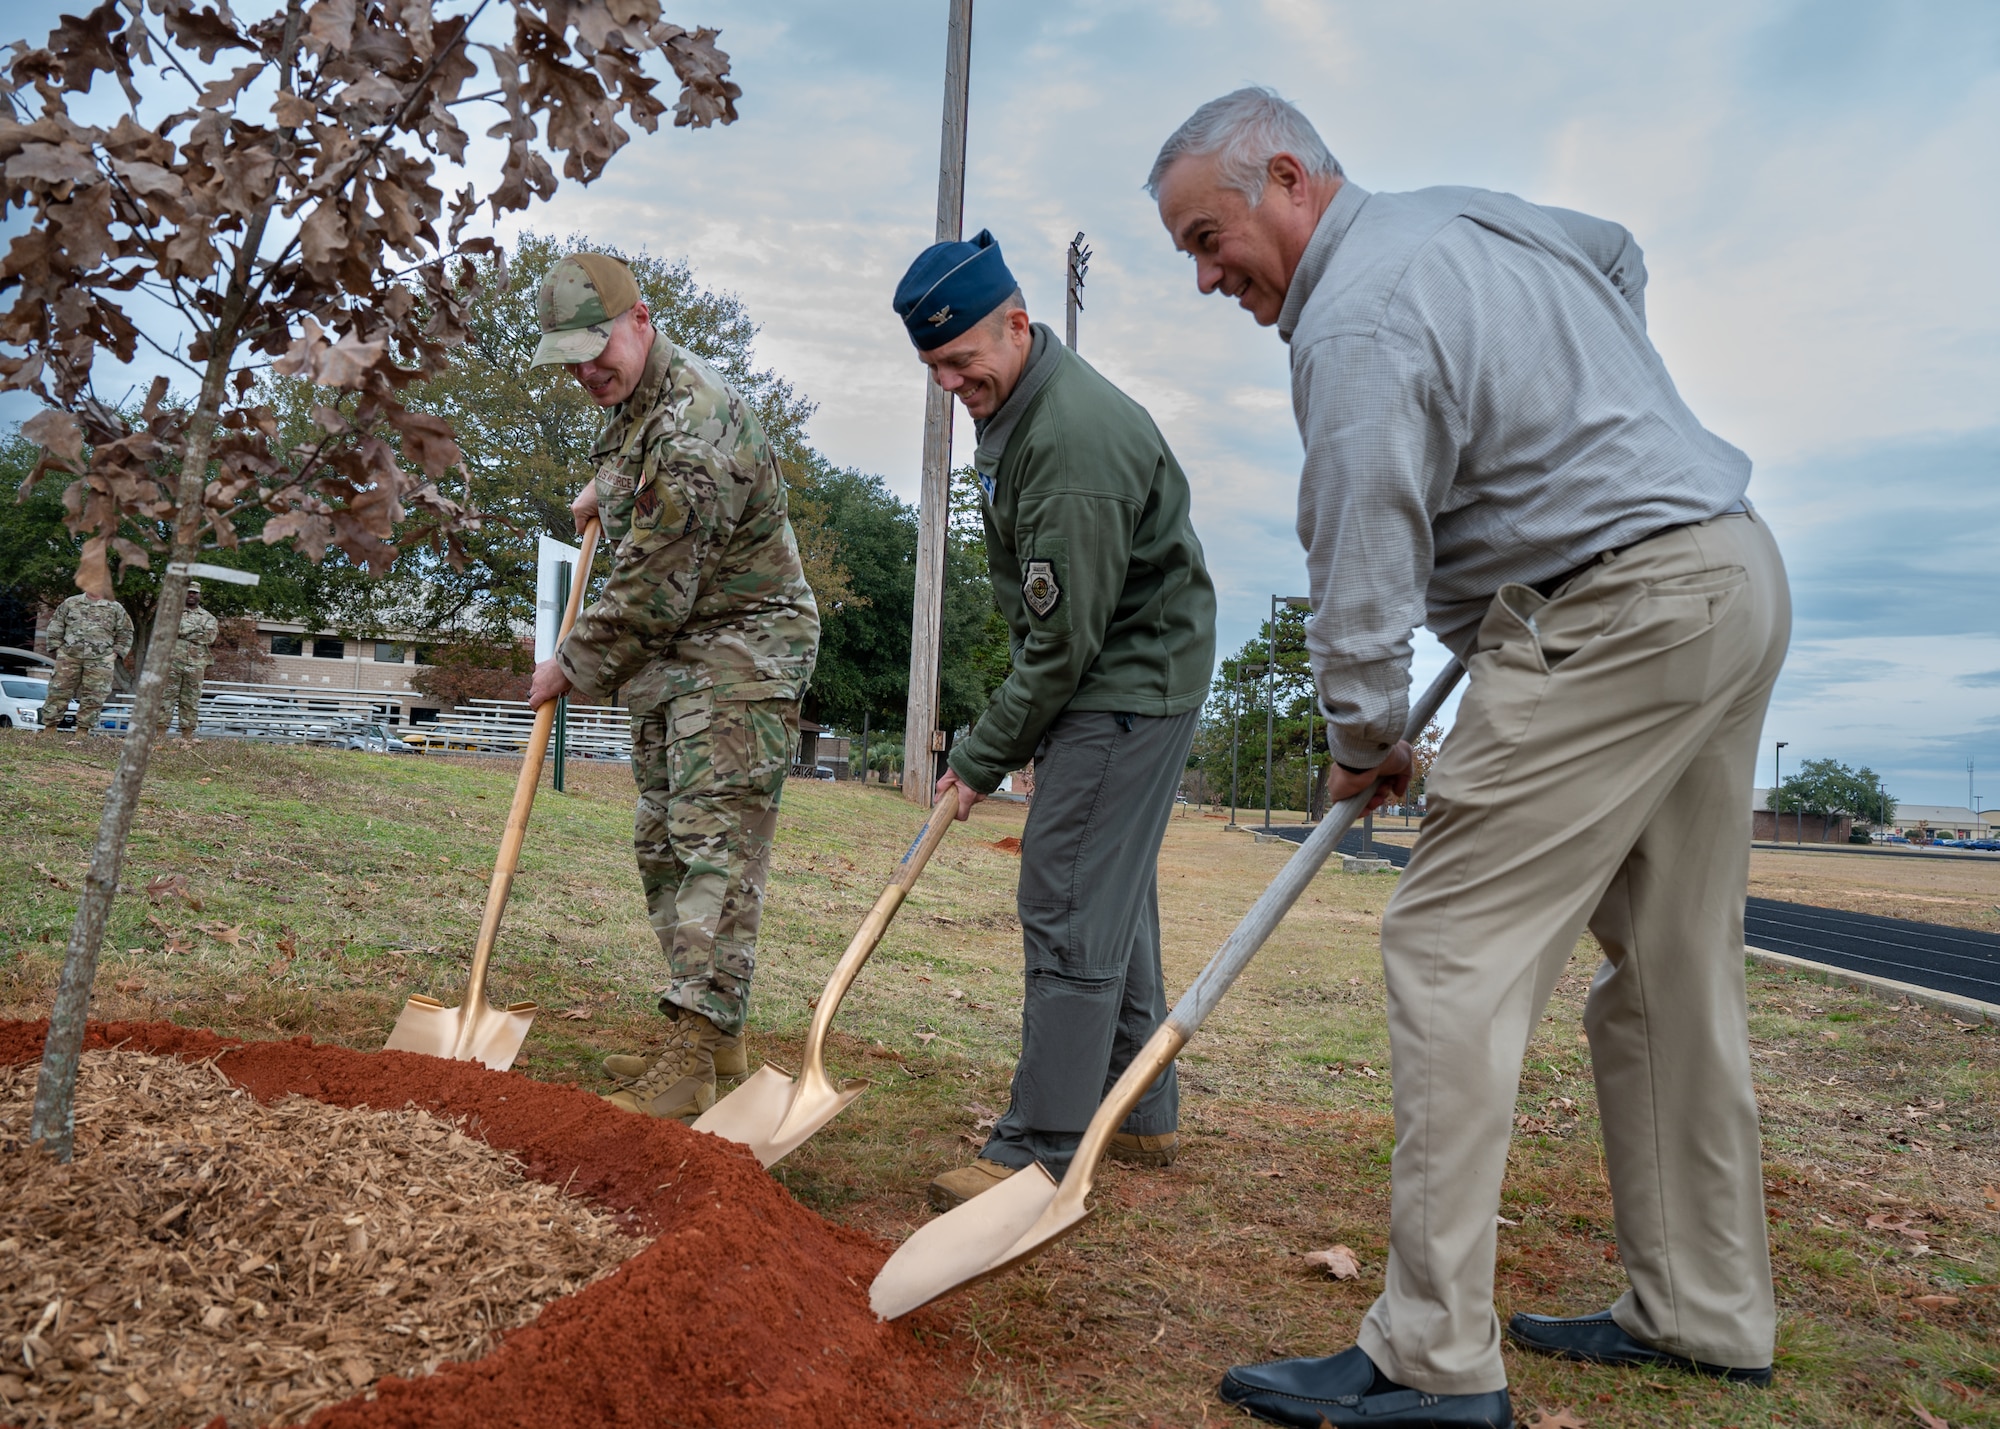 Three men lean down to dump dirt from their shovels around the base of a tree.